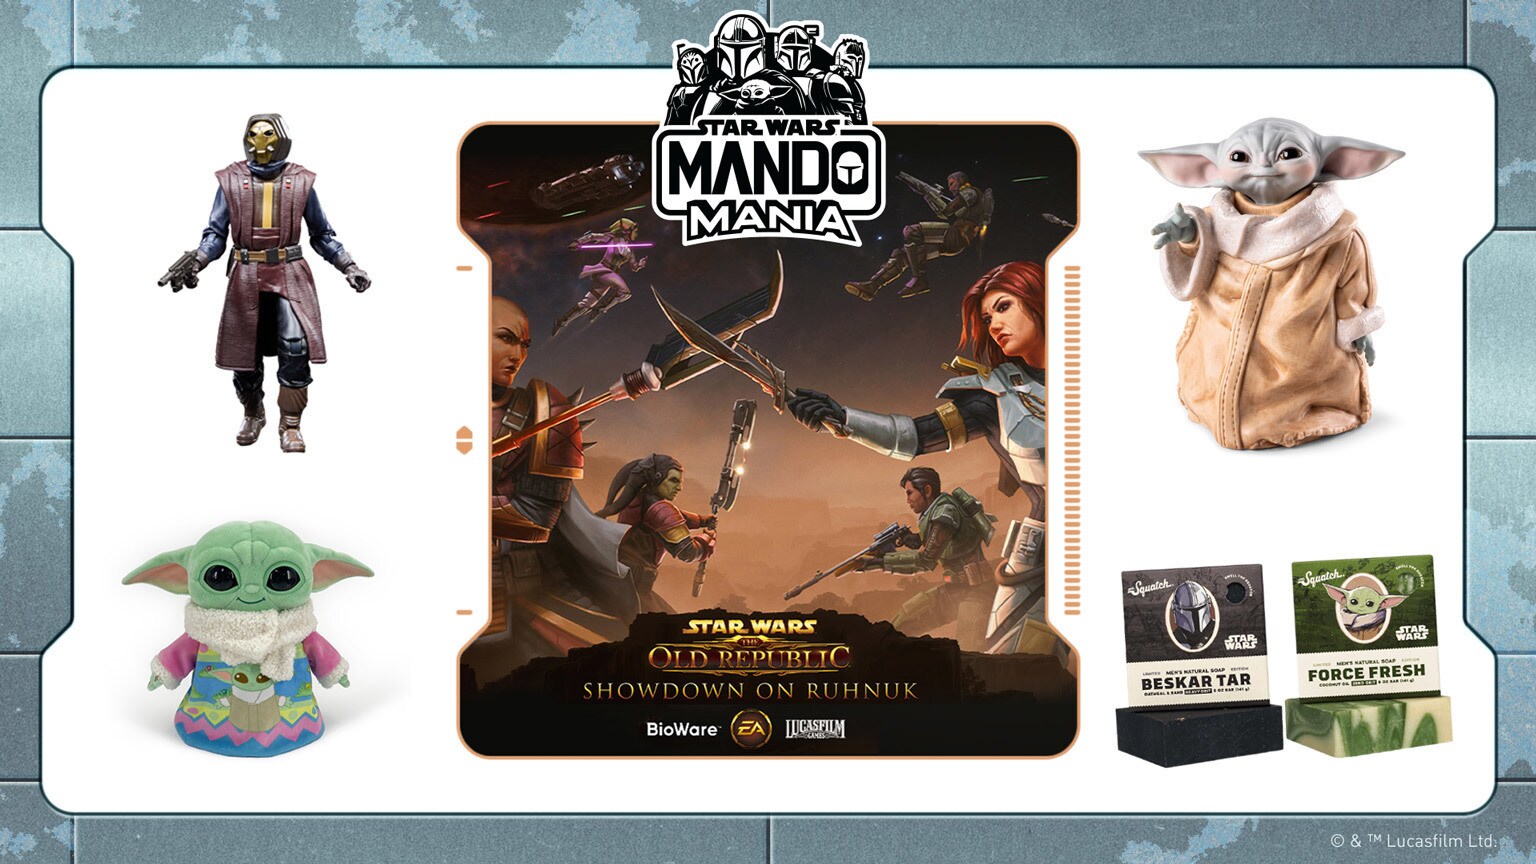 Mando Mania: Black Series Pyke Soldier Revealed, and More!